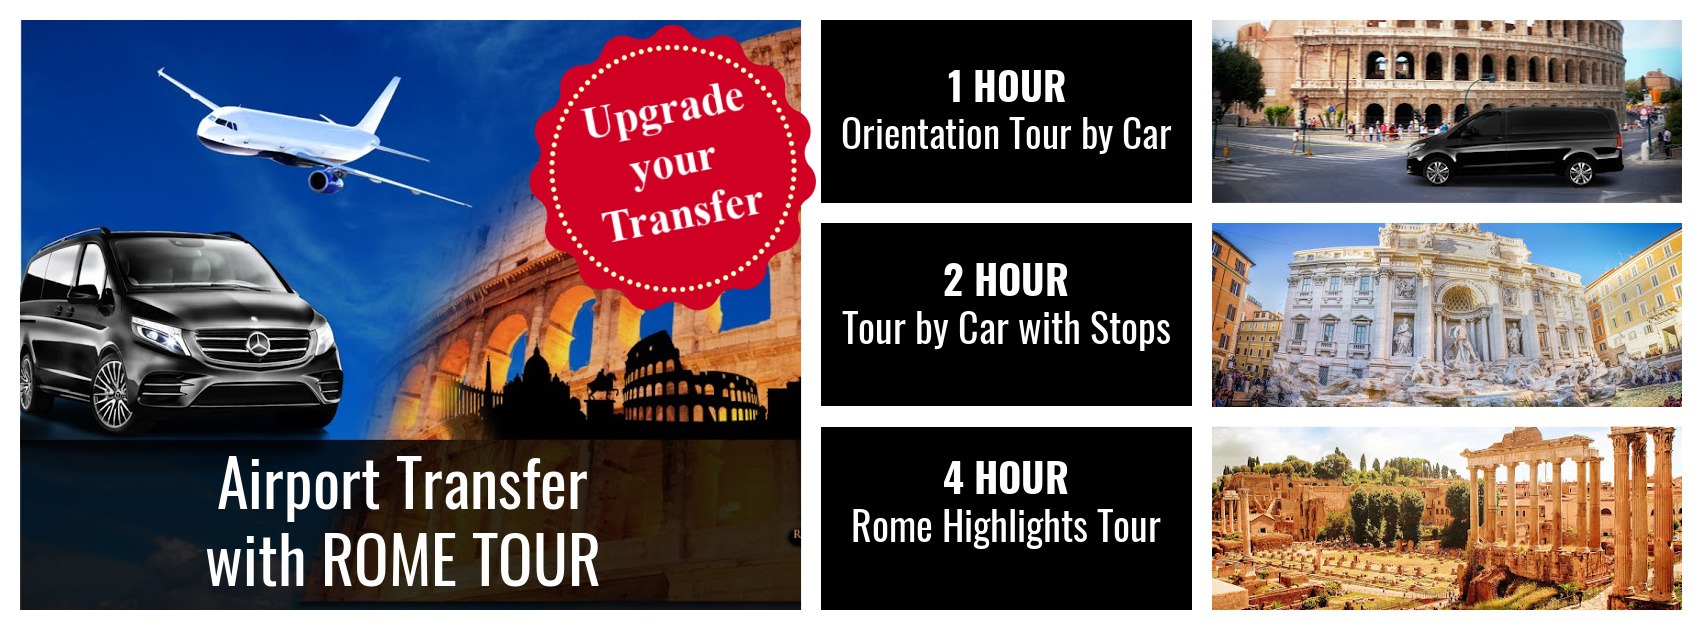 Rome Chauffeur Airport Transfer and Rome Tour